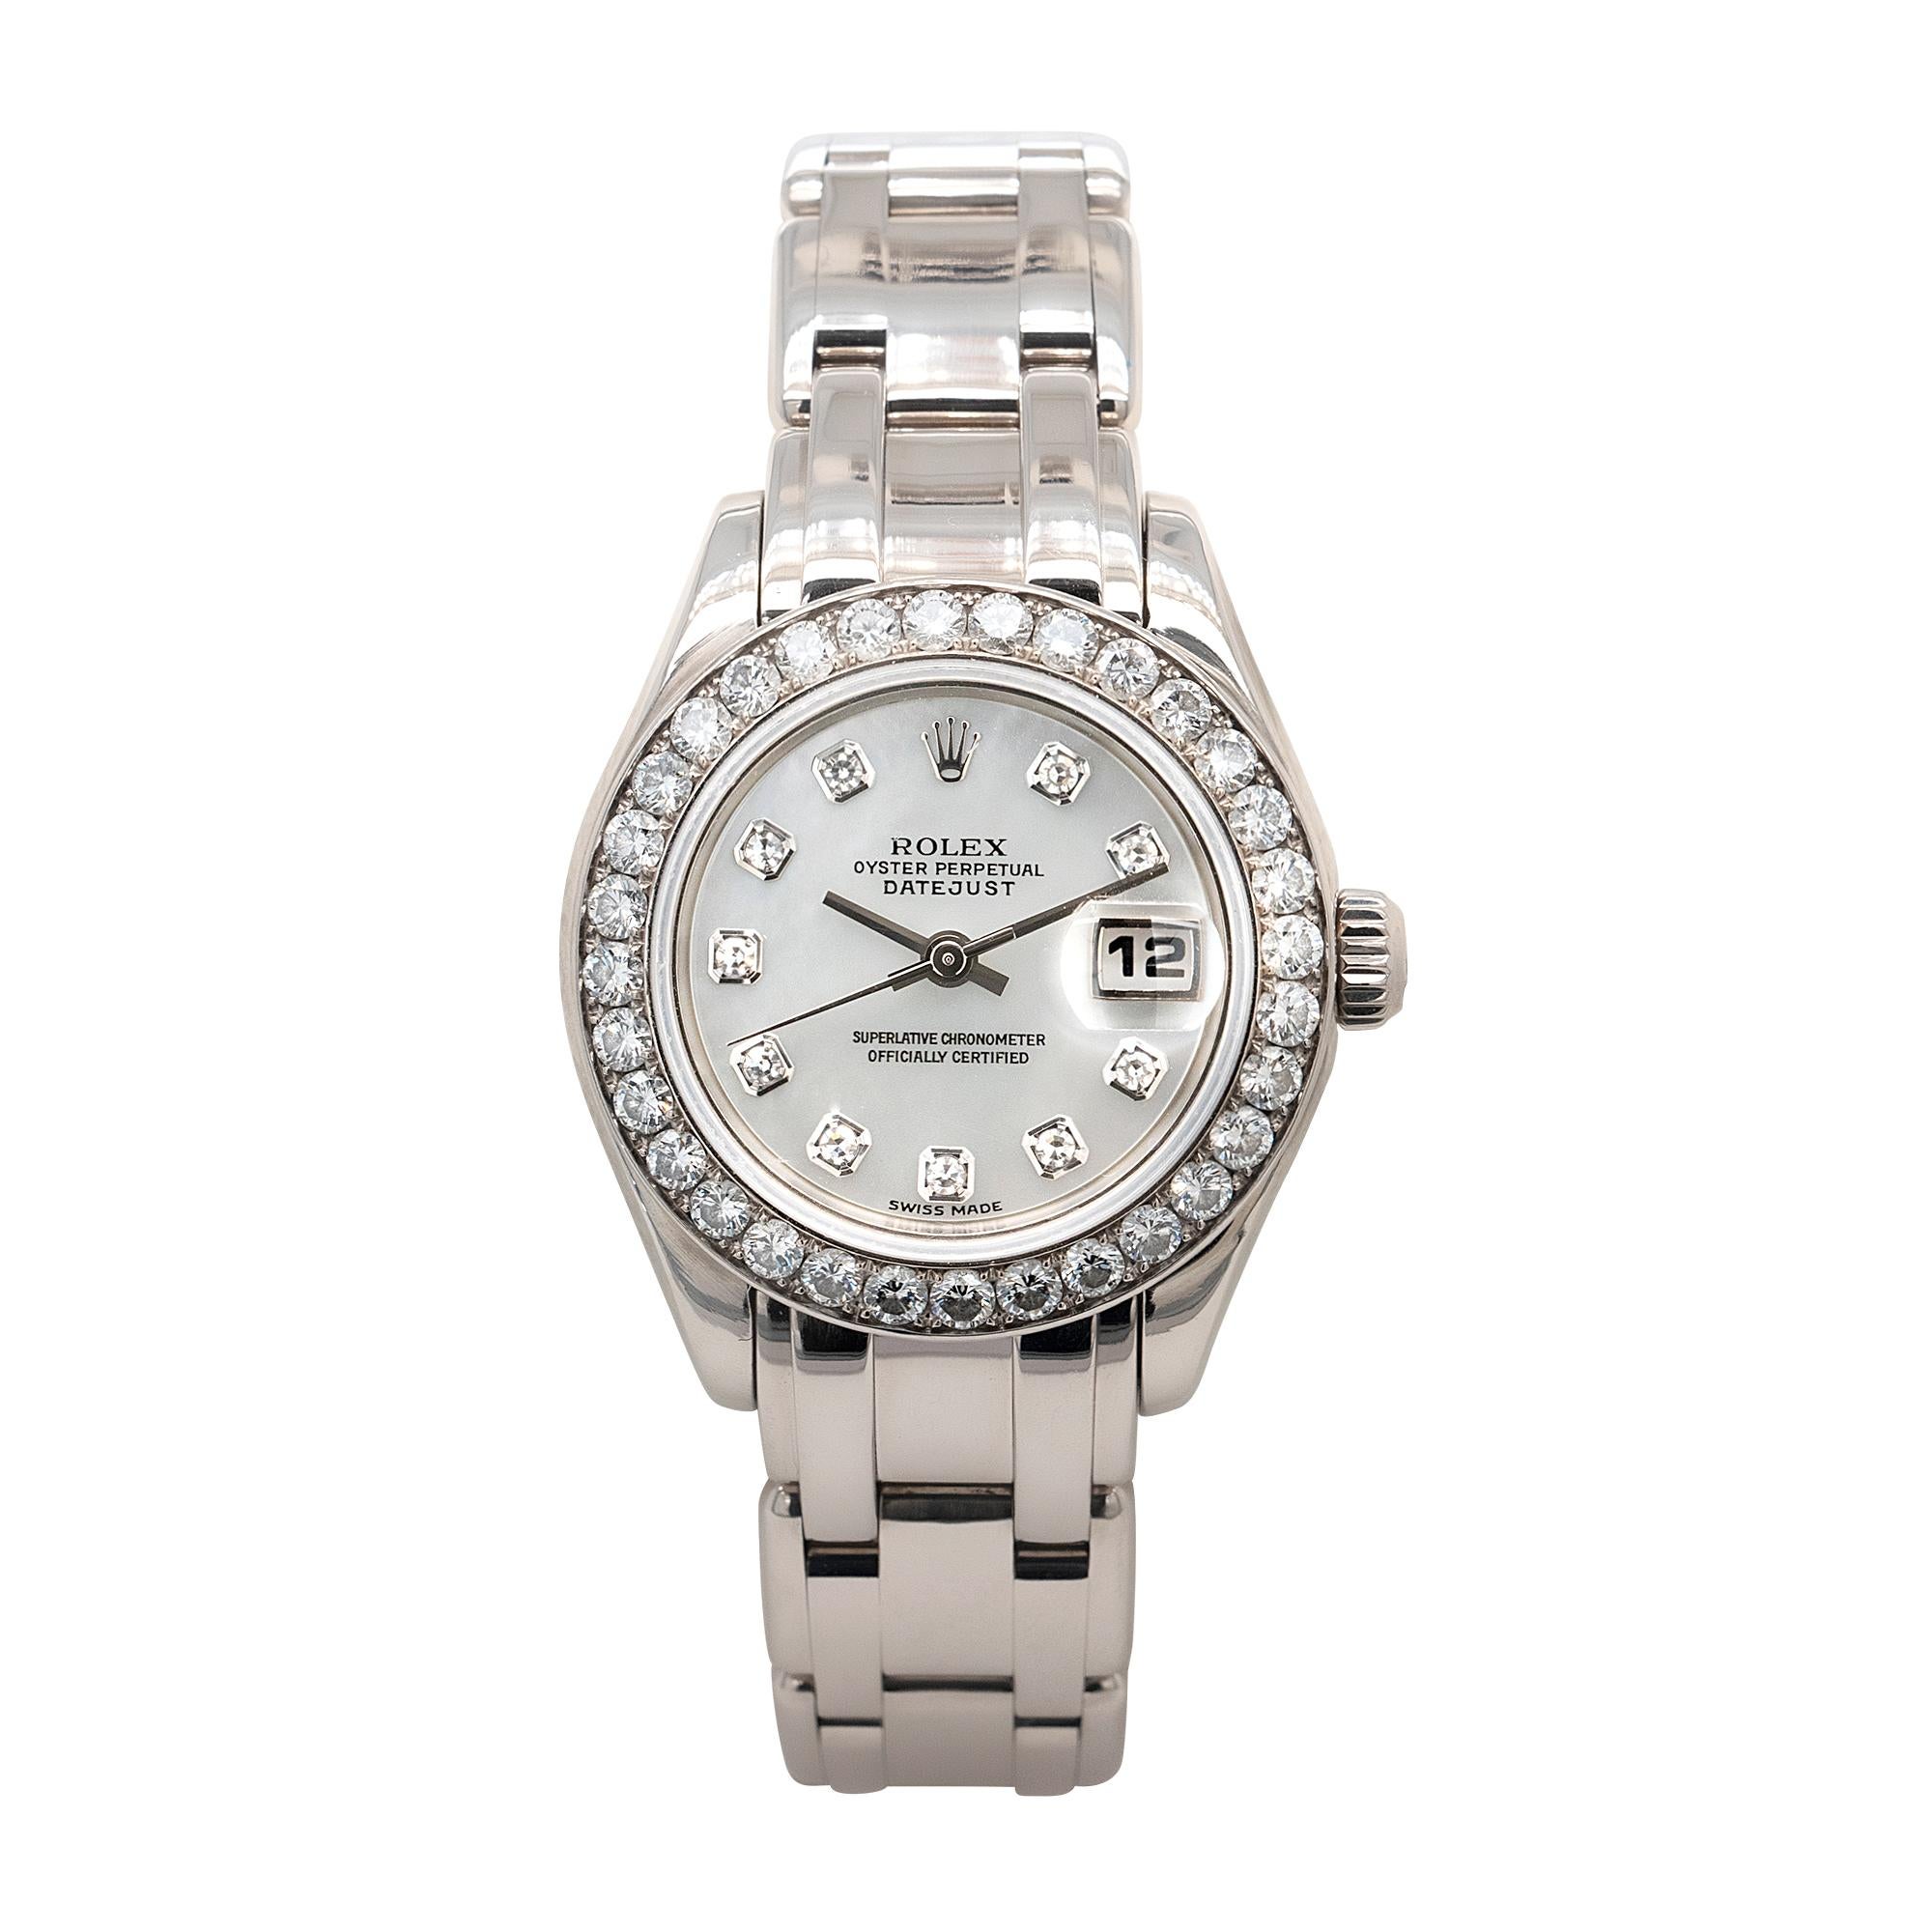 Brand: Rolex
Model Name: Rolex Pearlmaster Masterpiece White Gold Diamond Ladies Watch
Model Number: 80299
Case Material: 18k White Gold
Case Diameter: Oyster Case 29.0mm
Crystal: Scratch Resistant Sapphire Crystal with Cyclops Magnifier.
Bezel: